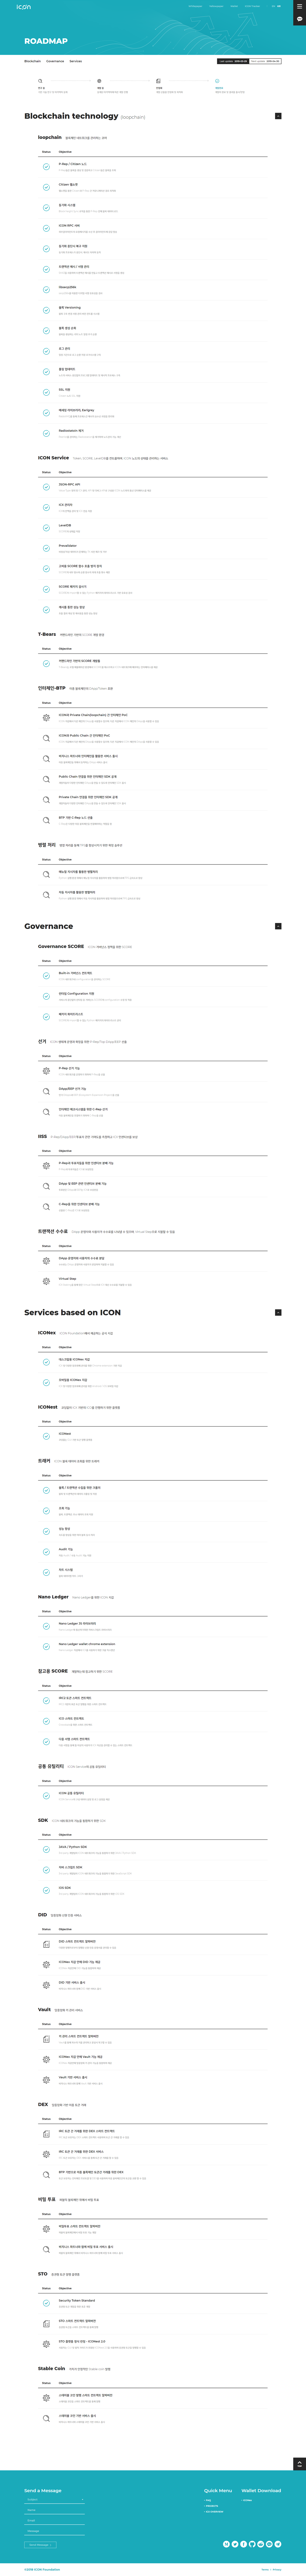 screencapture-m-icon-foundation-contents-roadmap-2019-03-29-17_03_01.png